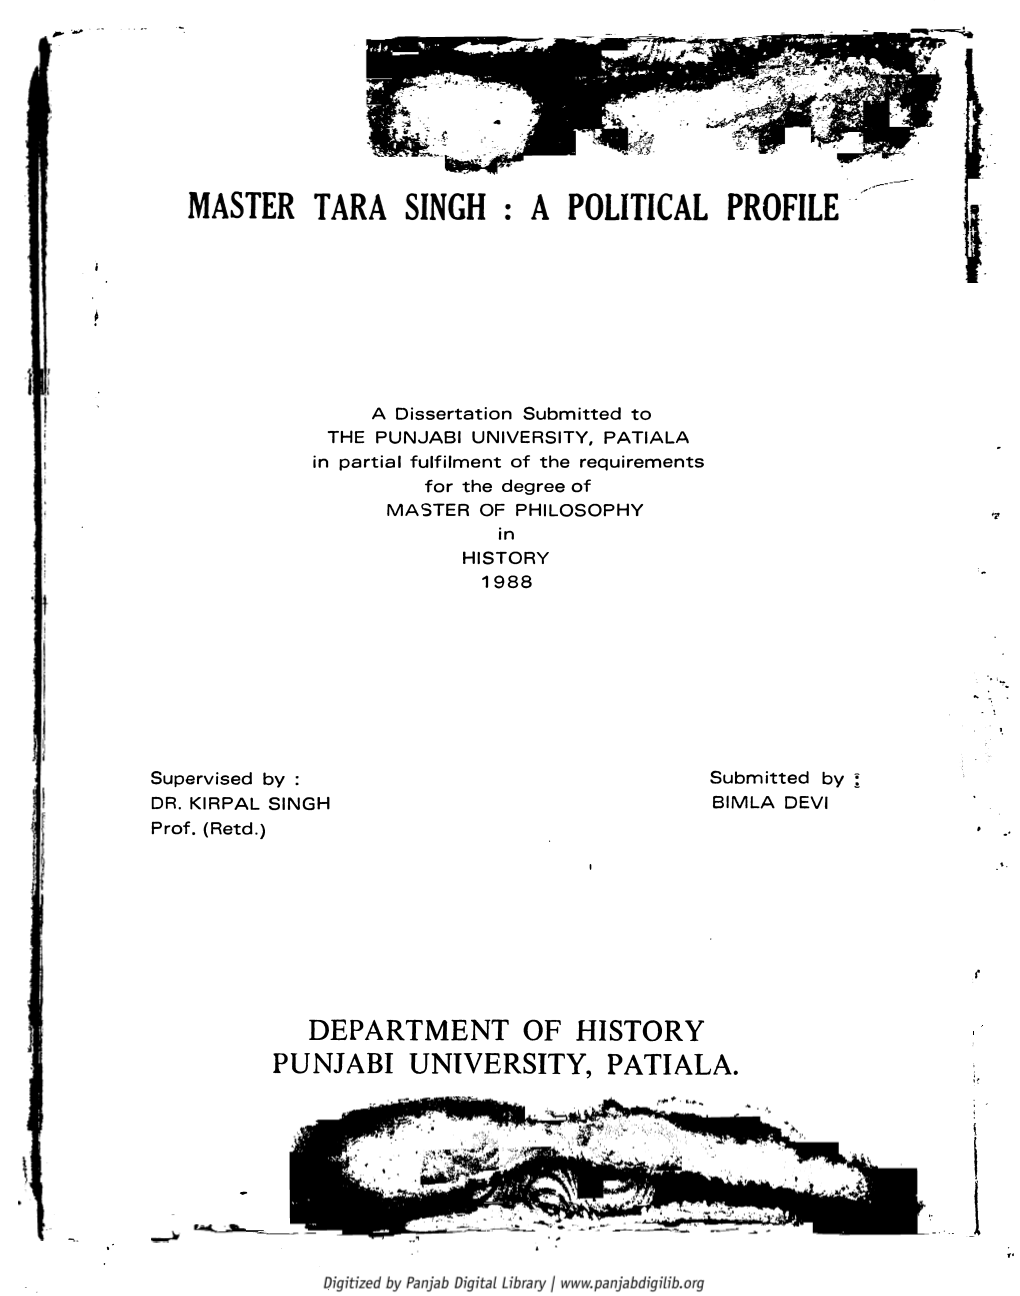 A Dissertation Submitted to the PUNJABI UNIVERSITY, PATIALA in Partial Fulfilment of the Requirements for the Degree of MASTER of PHILOSOPHY in HISTORY 1988